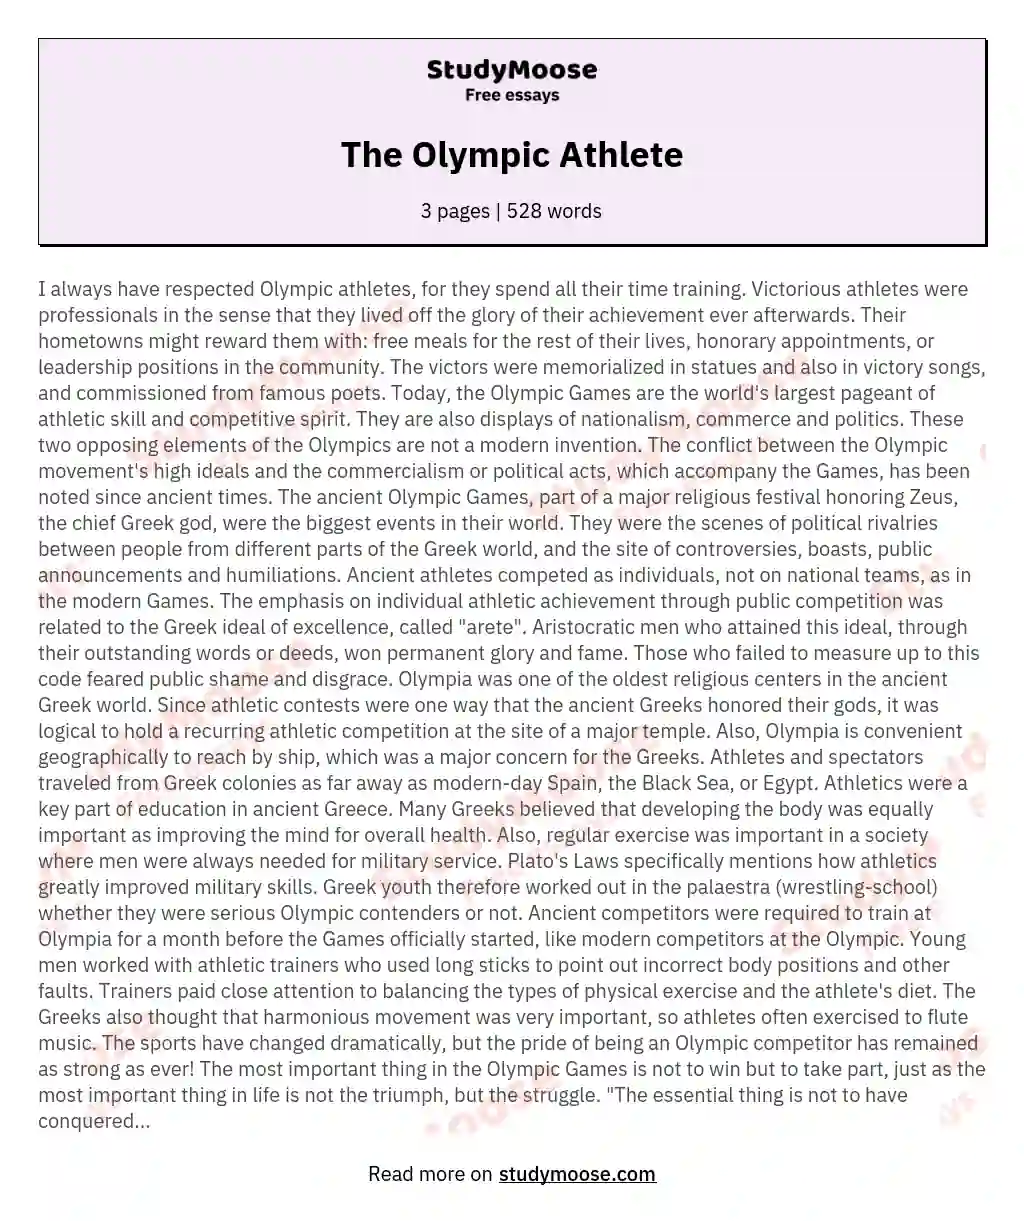 The Olympic Athlete